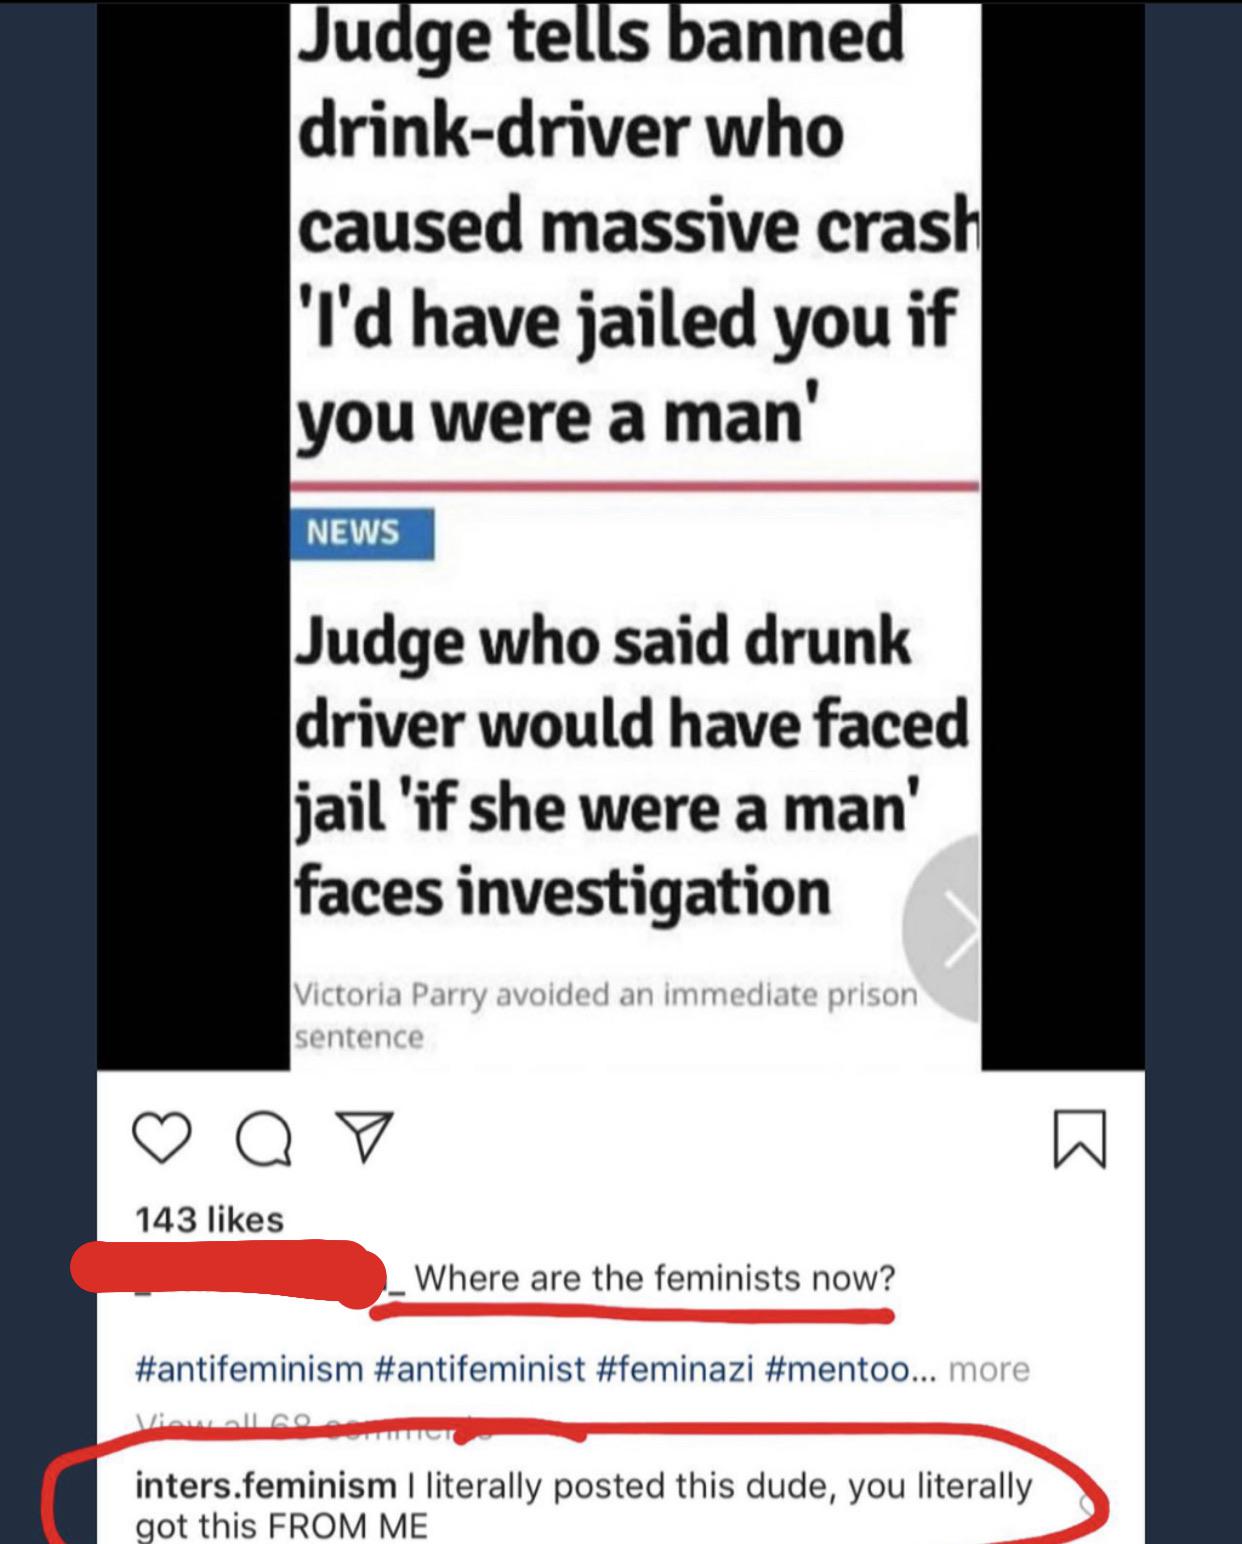 women feminine-memes women text: Ju gete anne drink-driver who caused massive crasYI 'I'd have jailed you if you were a man' NEWS Judge who said drunk driver would have faced jail 'if she were a man' faces investigation Victoria Parry avoided an immediate prison sentence 143 likes Where are the feminists now? #antifeminism #antifeminist #feminazi #mentoo... more inters.feminism I literally posted this dude, you literally got this FROM ME 